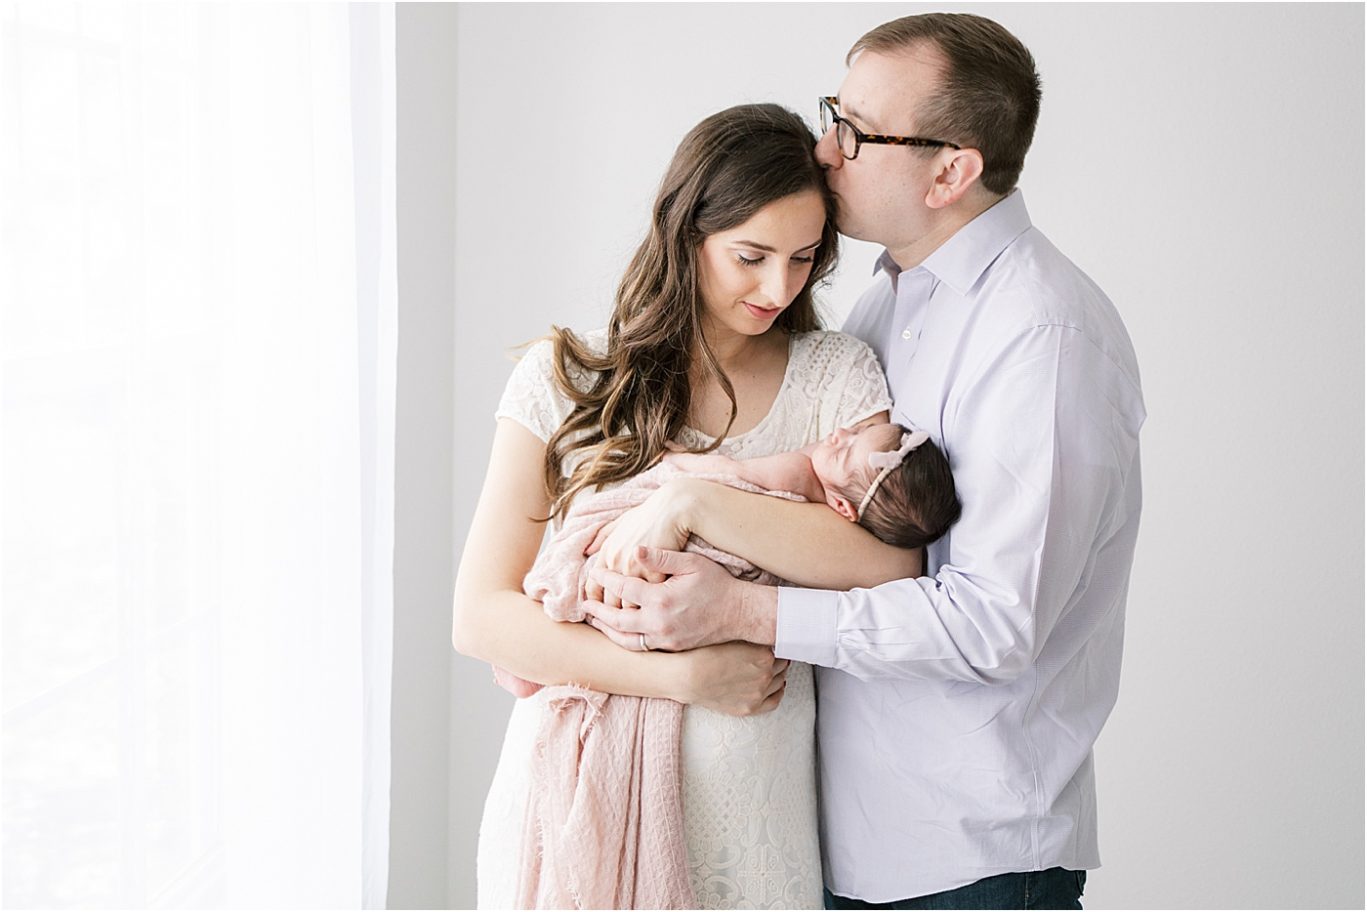 Dad kissing Mom while holding their baby girl. Newborn photo by Lindsay Konopa Photography.